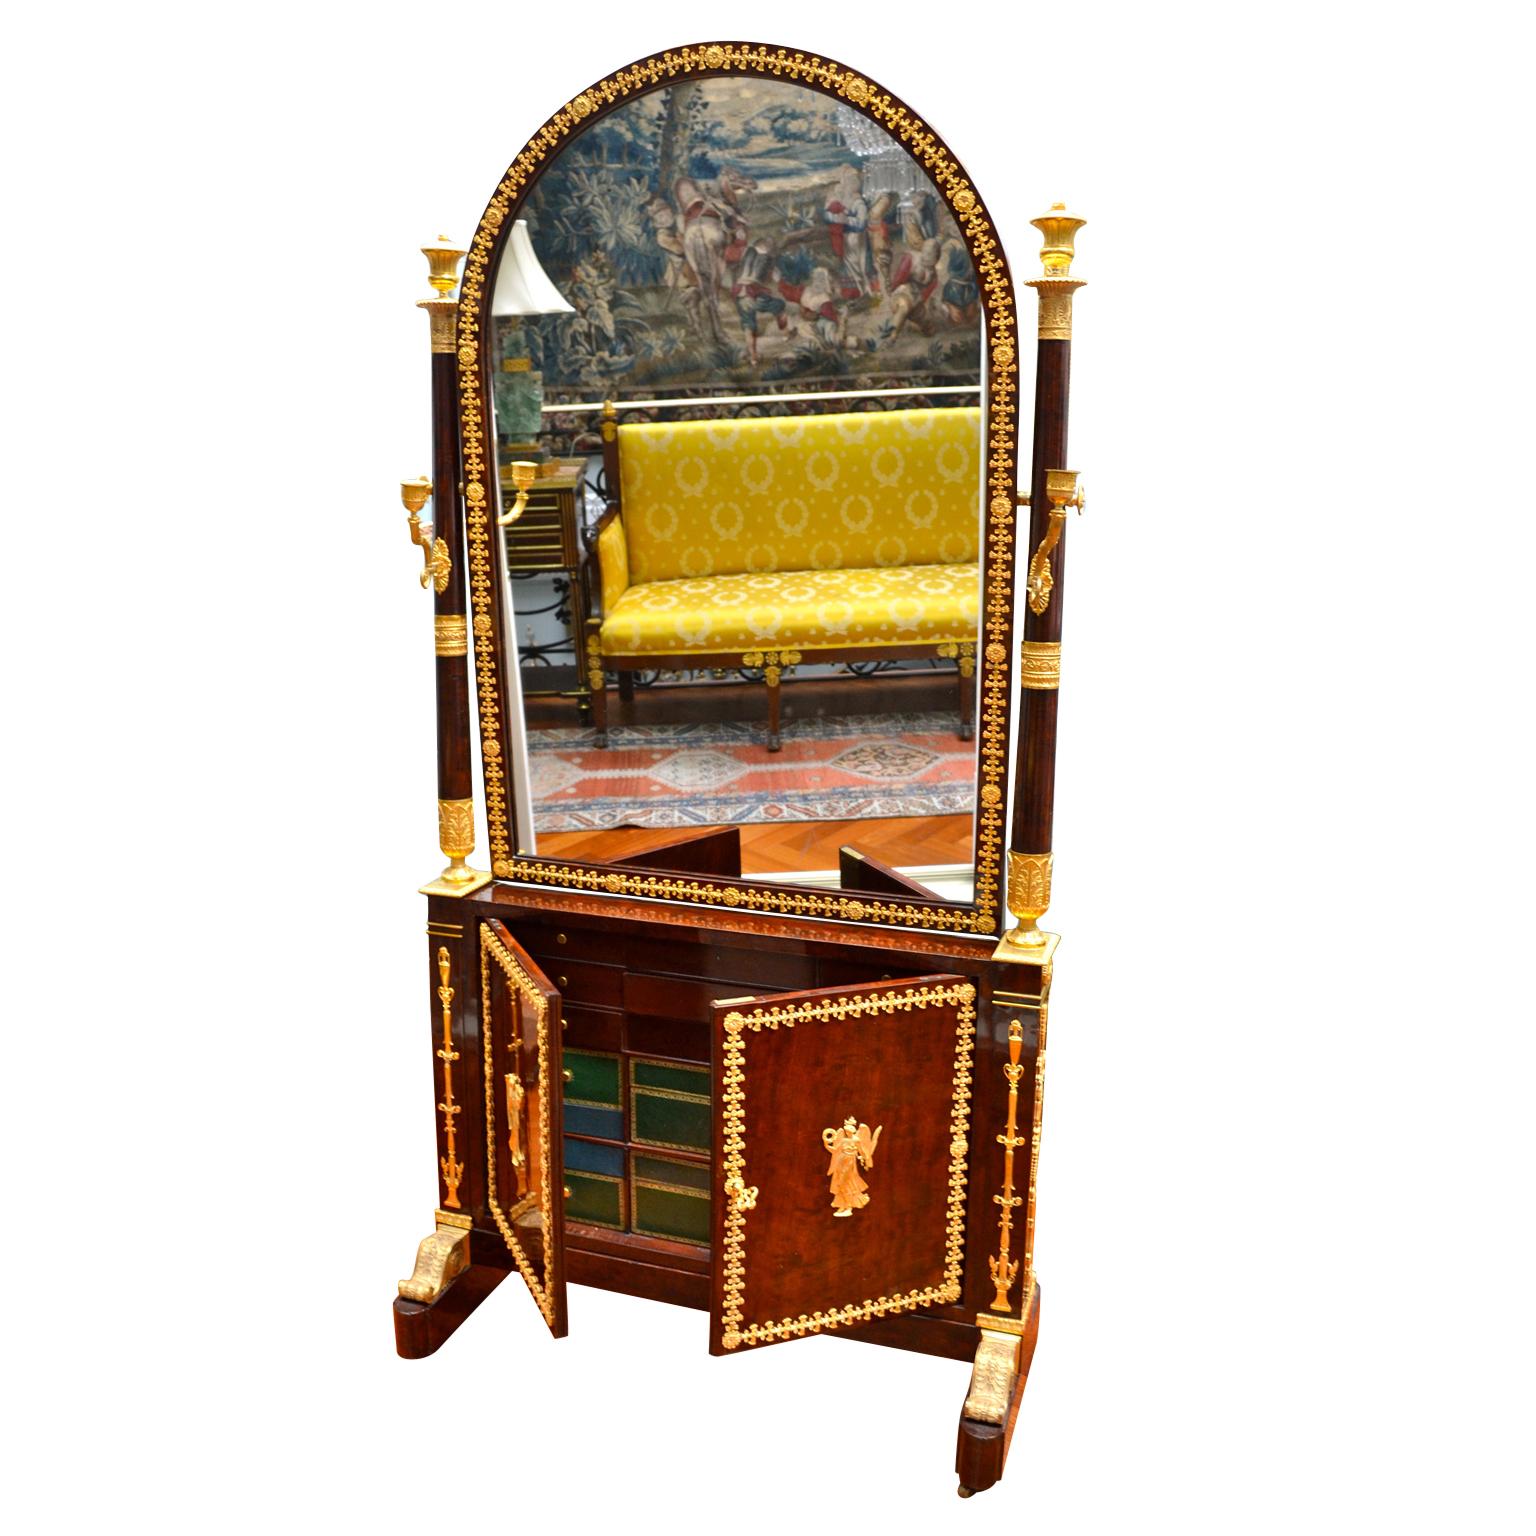 A mahogany cheval mirror and jewellery cabinet, once belonging to Leitizia Bonaparte, Napoleon's mother. The veneered semi circular topped mirror framed by columns topped with gilt bronze cassolettes and single arm candle holders.
The bottom